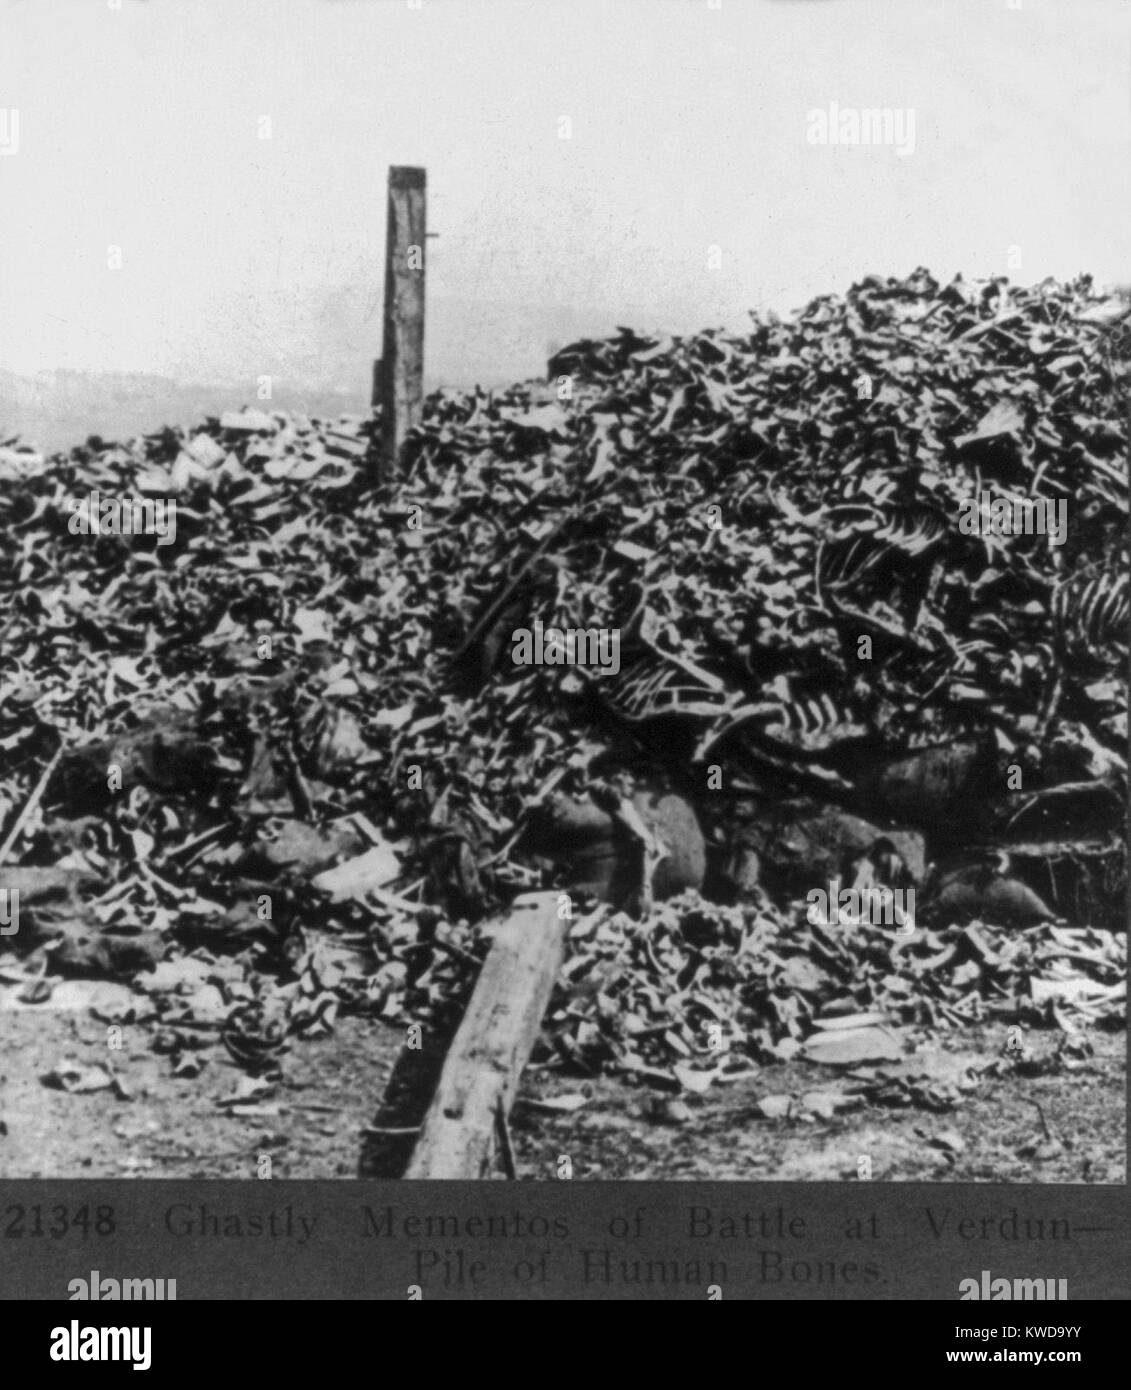 World War 1: Battle of Verdun. Human bones were the ghastly mementos of battle at Verdun. After the war, the Douaumont Ossuary was built to memorialize and contain the bones of 130,000 French and German unknown dead from the Verdun battlefield. Ca. 1919. (BSLOC_2013_1_108) Stock Photo